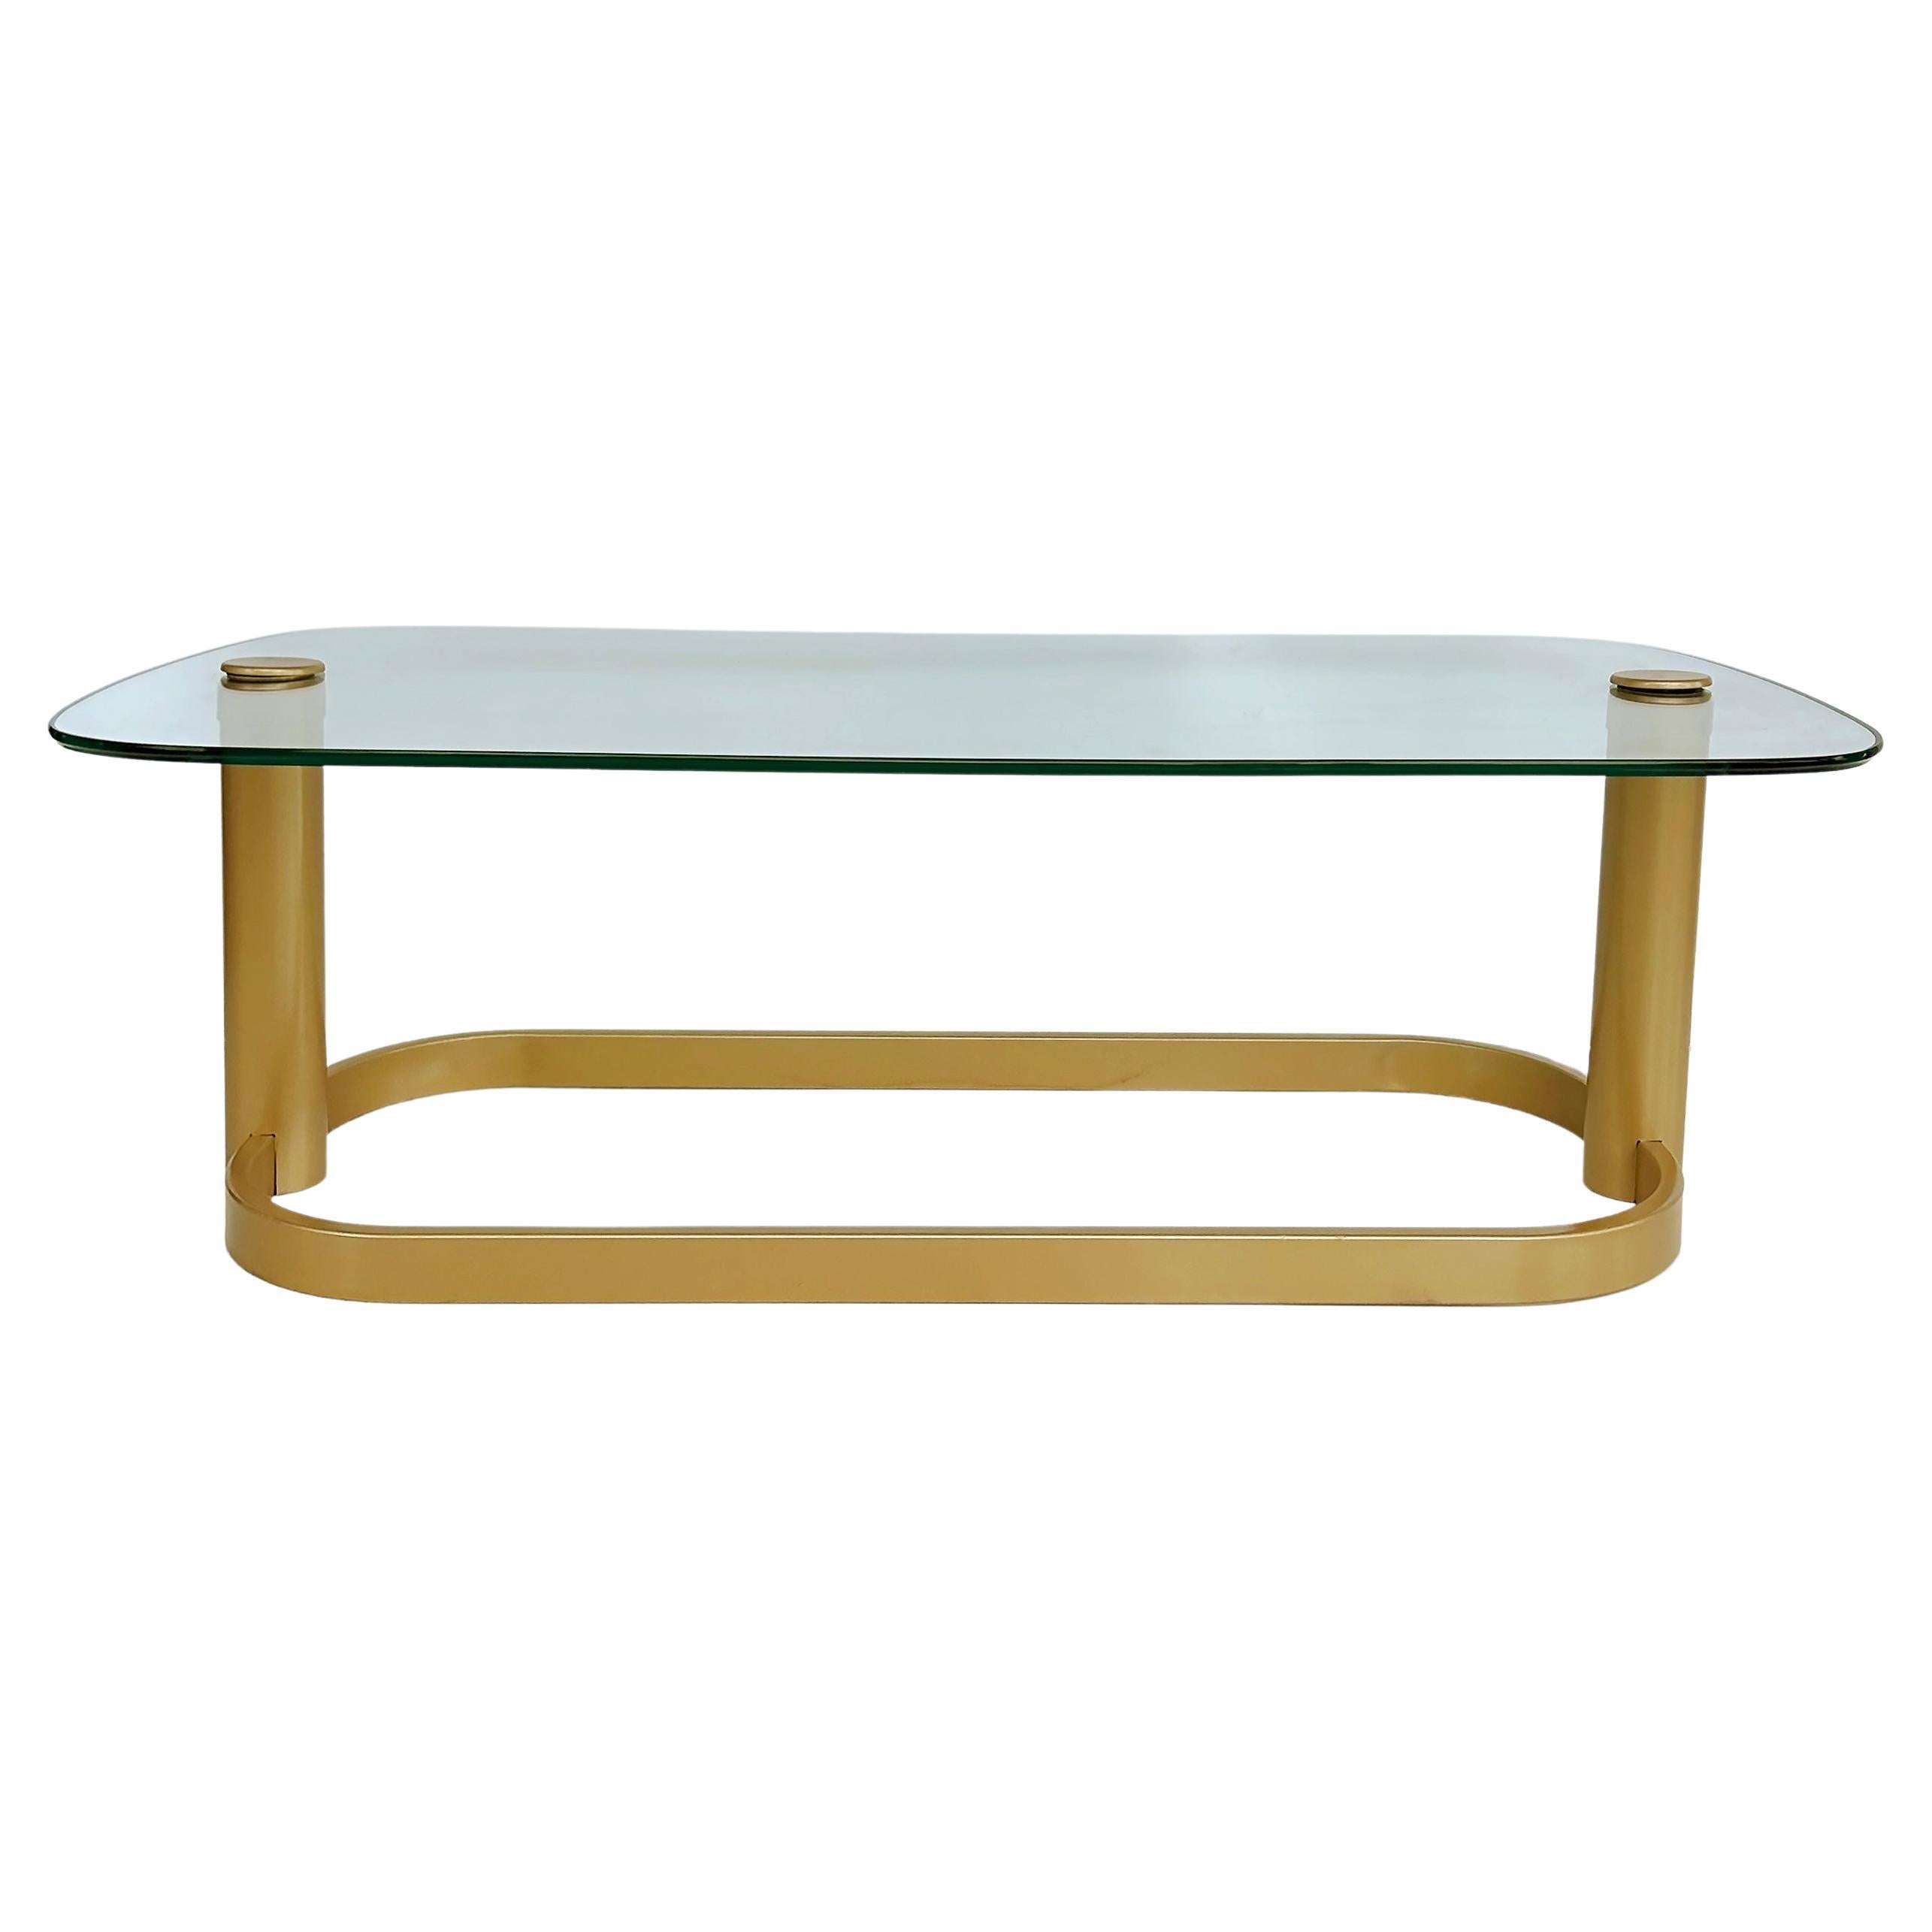 Vintage Modern Glass Top Coffee Table, Rounded Edges, Metal Base